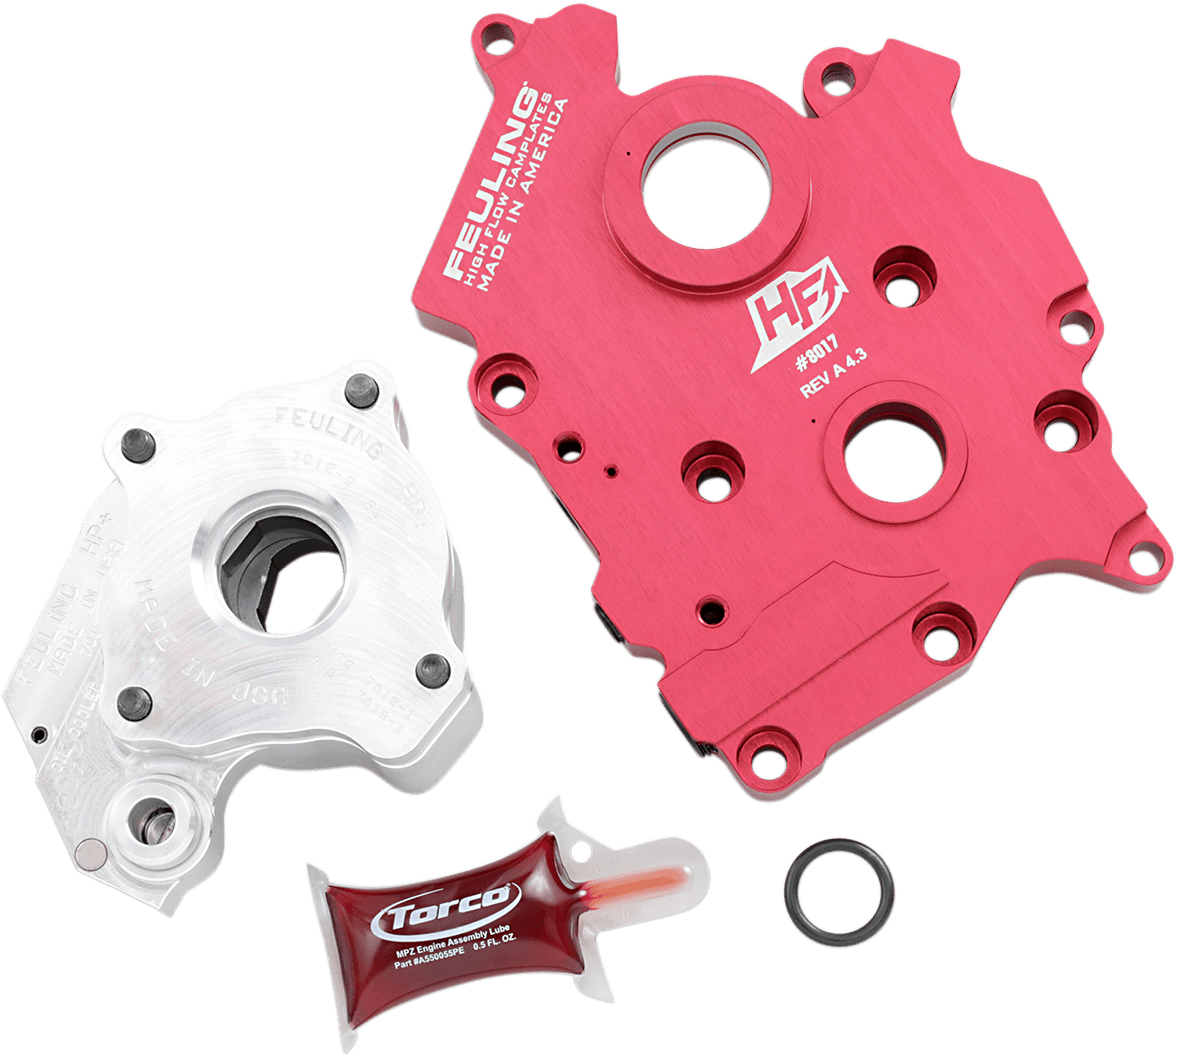 FEULING-HP+® High Volume Oil Pump / M8 Motors-Camchest Kits-MetalCore Harley Supply